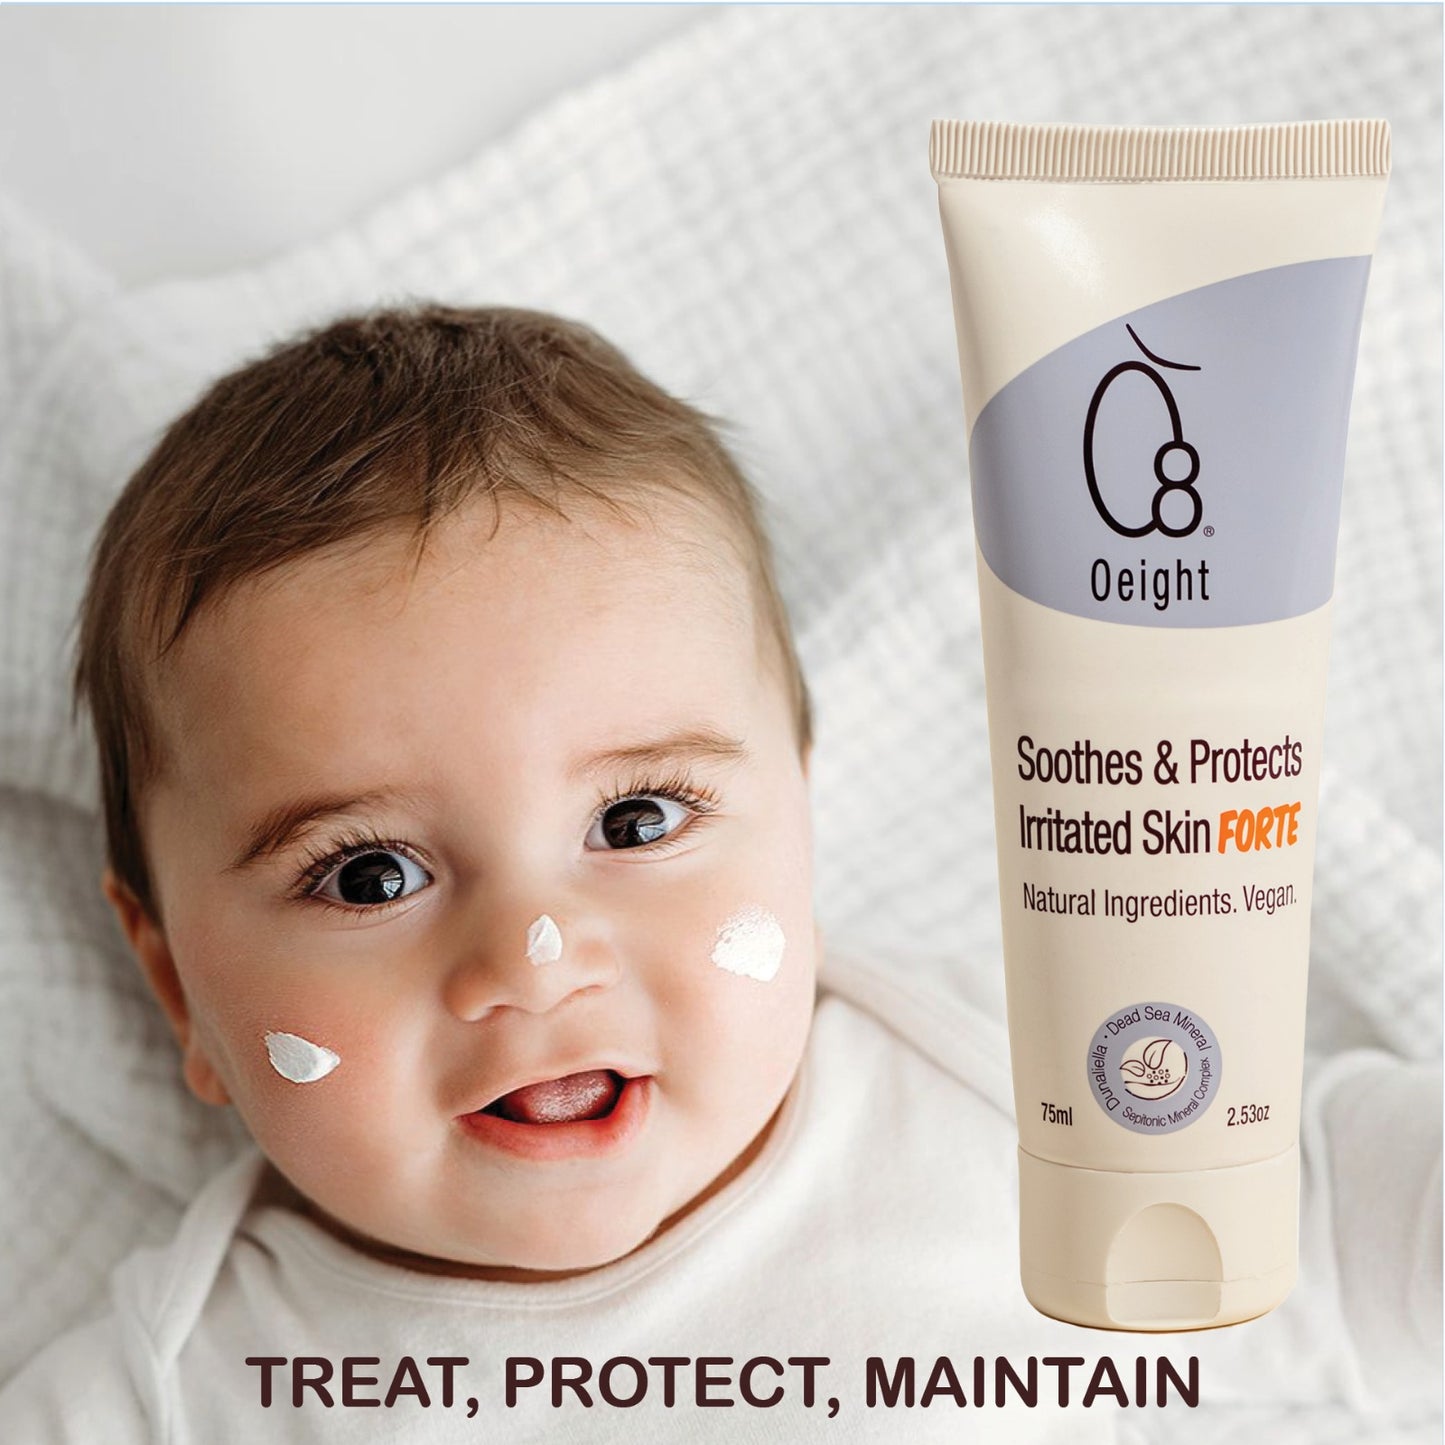 Soothe & Protects Irritated skin Forte